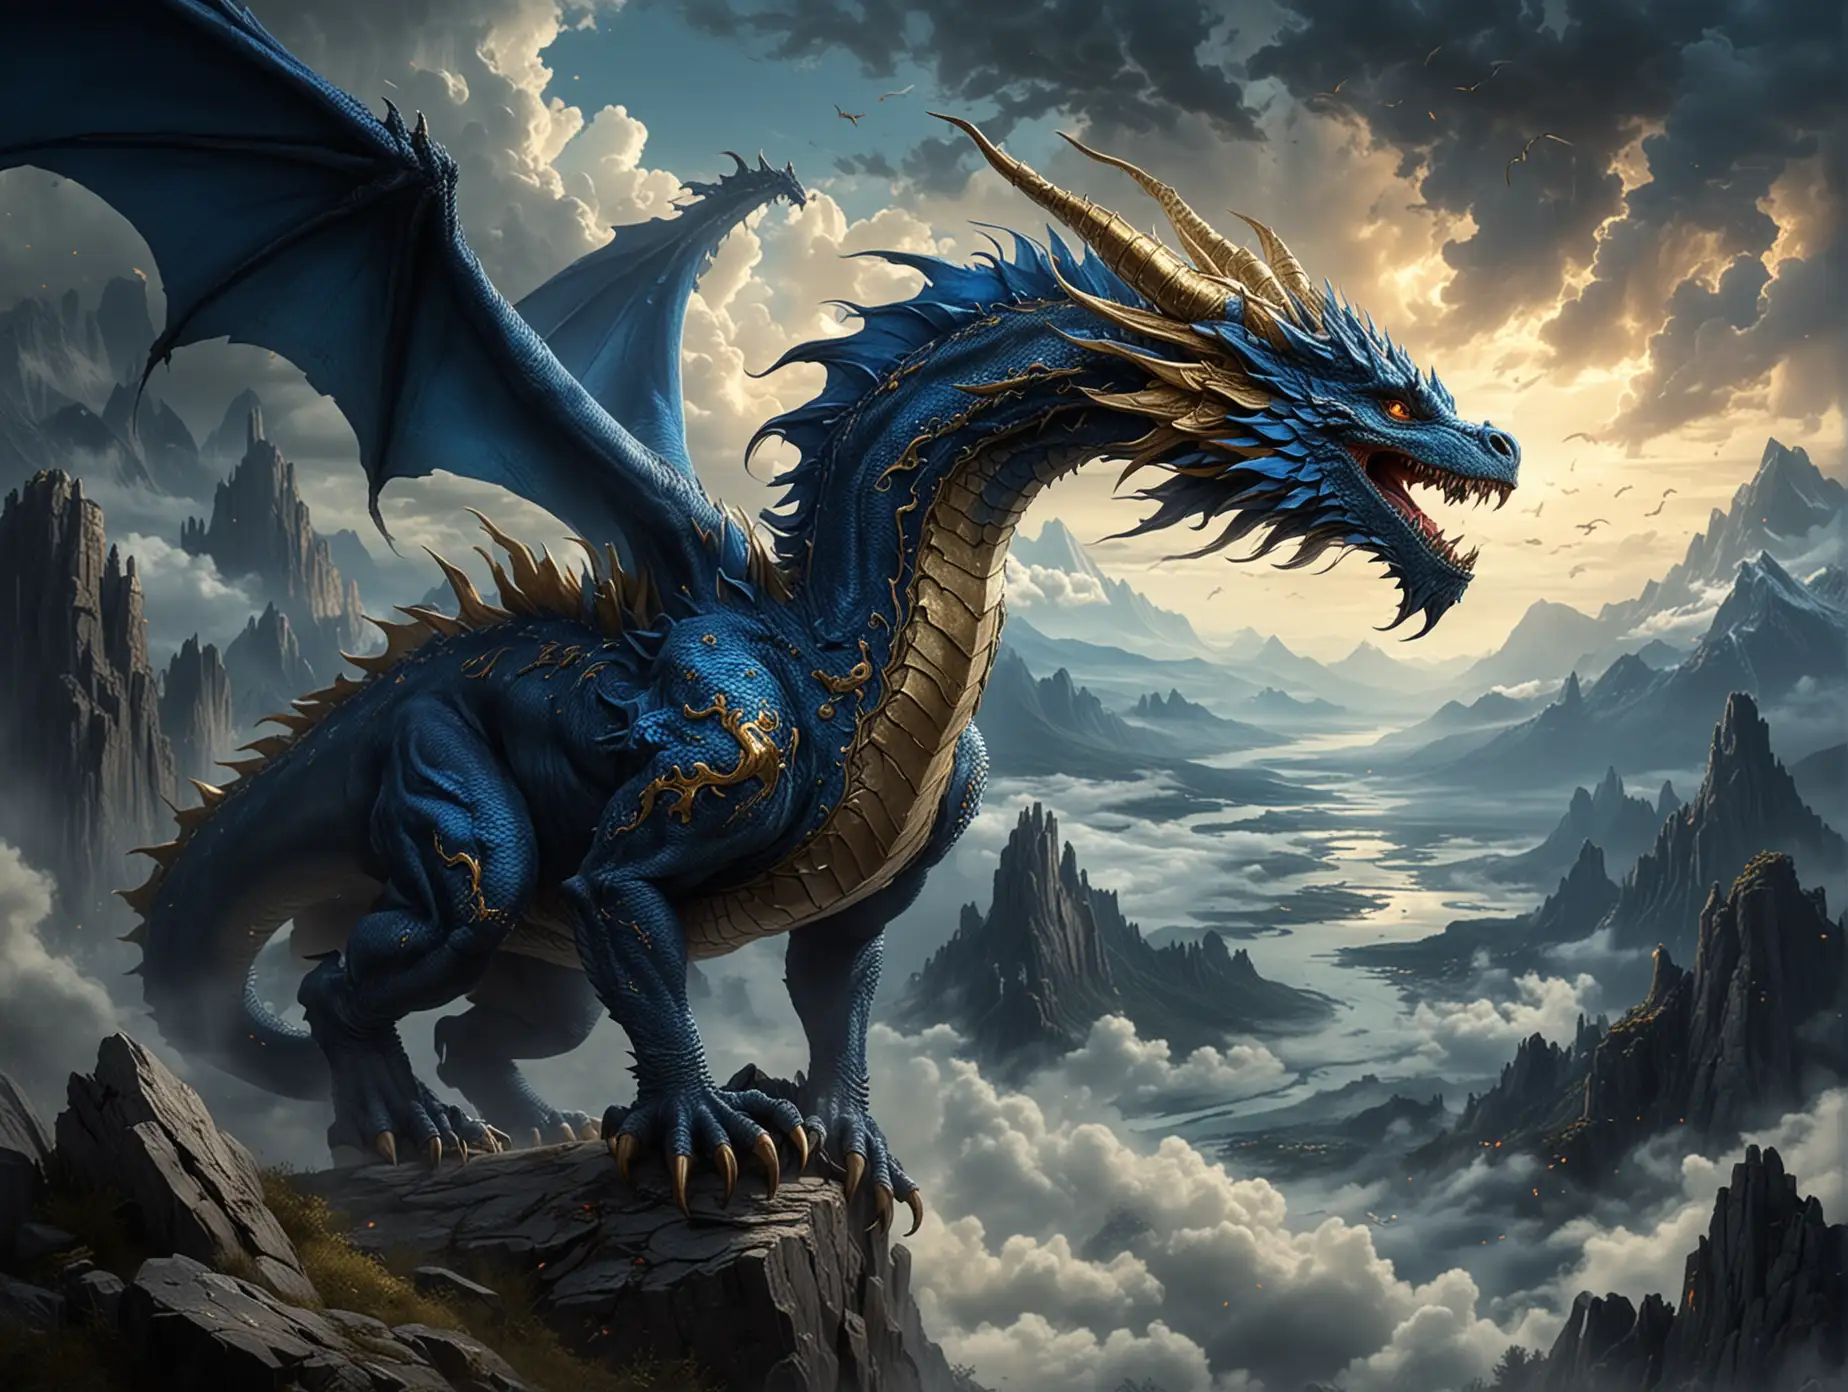 This is a piece of artwork depicting the mythical creature dragon. The dragon in the picture has the following features:n- The body of the dragon presents in a deep blue color, adorned with gold decorations.n- It possesses enormous horns and mane, looking very majestic.n- Its eyes flicker with blue light, making it look mysterious and powerful.n- Its claws are sharp and strong, indicating that it is a formidable predator.n- The entire scene is filled with clouds and mountains, creating a fantasy atmosphere.nnIn general, this is a magnificent and imaginative picture that displays the image of dragons as powerful beings in legends.